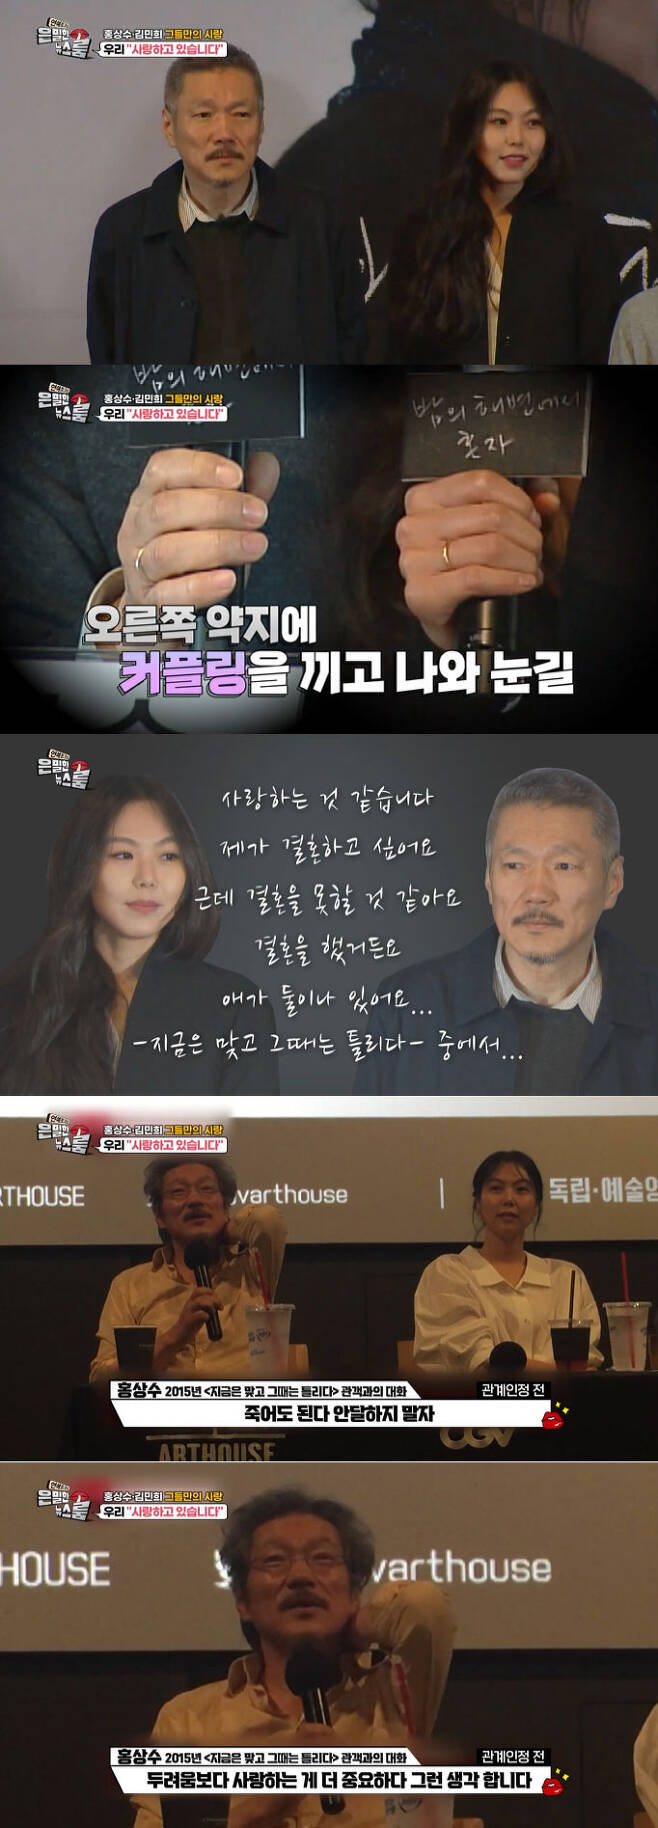 IHQ Secret The Newsroom, which was broadcast on the 13th, discussed the story after the disappearance of Hong Sangsoos brother-in-law, who was known for his report in April.On the day of the disappearance report, the reporters visited the single-family house in Pyeongchang, Gangwon Province, at the end of the gate, where they lived in the resident registration of Hong Sangsoos brother in January.On the 26th of last month, when the reporters visited the home of Hong Sangsoos brother, the police and the science Susa University were already Super Wings.Asked by reporters, What Susa is in progress, a science Susa official denied Susa, saying, I have been training, while a Pyeongchang police officer who was Super Wings on the scene said, It is another incident.The reporters asked Bae Sang-hoon Profiler for advice without notifying the coverage in advance.It is not normal to conduct excavation training in the private sector, said Bae Sang-hoon, a profiler who watched only the video.After repeated coverage, Hong Sangsoos brother-in-law was confirmed to be missing for 10 months, and an official at the Pyeongchang Police Station in Gangwon Province, the jurisdiction of the case, said, We have not found the party (missing person) yet.Secret The Newsroom also covered the affair between Hong Sangsoo and Kim Min-hee.Reporter Kim Tae-jin recalls the movie Now is right and then it is wrong production presentation that Hong Sangsoo and Kim Min-hee made before admitting their relationship. In general, most of the actors do not care about the interview. Hong Sangsoo watched the actors at a close distance and reacted.I thought it was a little strange at the time, he recalled.Kim Min-hee was visibly embarrassed when asked, Is this movie an autobiographical story of Hong Sangsoo?I did not understand the Kim Min-hee reaction because it was a question I gave without any intention, but after the two of you acknowledged the relationship, all the situations were puzzled. Hong Sangsoo, Kim Min-hee developed into a lover in January 2015 with the movie Now is right and then it is wrong.It was known as a report in Korea in 2016 and Hong Sangsoo admitted his direct relationship with Kim Min-hee at the press distribution premiere of the film Only at the Beach of the Night in March 2017.When they admitted to having an affair, they caught my eye with a pairing. Hong Sangsoo said, I dont know if its a place to talk.We love it honestly in our own way, and Kim Min-hee also said, We value and believe in meeting, and we meet and love with sincerity.We are humbly accepting all the situations that are coming and going to us. Secret The Newsroom also introduced meaningful ambassadors to Now is right and then it is wrong.The movie says, I think I love you. I want to get married. But I dont think I can get married. Im married.I have two children, he said, adding that it is like an ambassador expressing Hong Sangsoos shaking mind. The performers were surprised that they were like my story.The response of Hong Sangsoos wife was also reported.One performer said, The wife of director Hong Sangsoo is very good at the movie, so I would have seen the movie. In an interview, I was already nervous when I watched the movie.Meanwhile, director Hong Sangsoo married in 1985 and had a daughter.